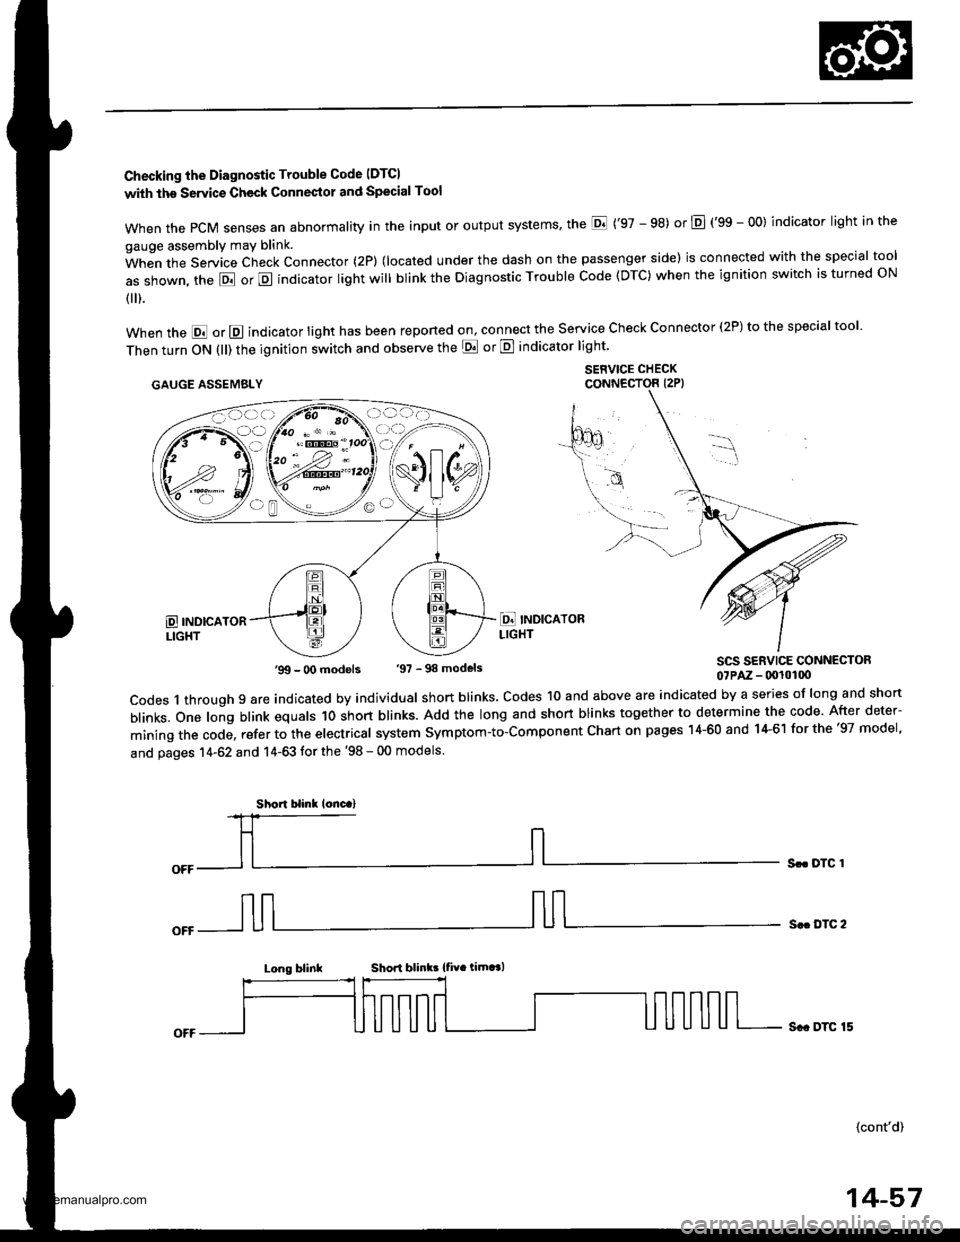 HONDA CR-V 1997 RD1-RD3 / 1.G Workshop Manual 
Checking the Diagnostic Trouble Code IDTCI
with the Servic€ Check Connestol and Special Tool
when the PcM senses an abnormality in the input or output systems the E (97 - 98) or E (gS - OO) indic